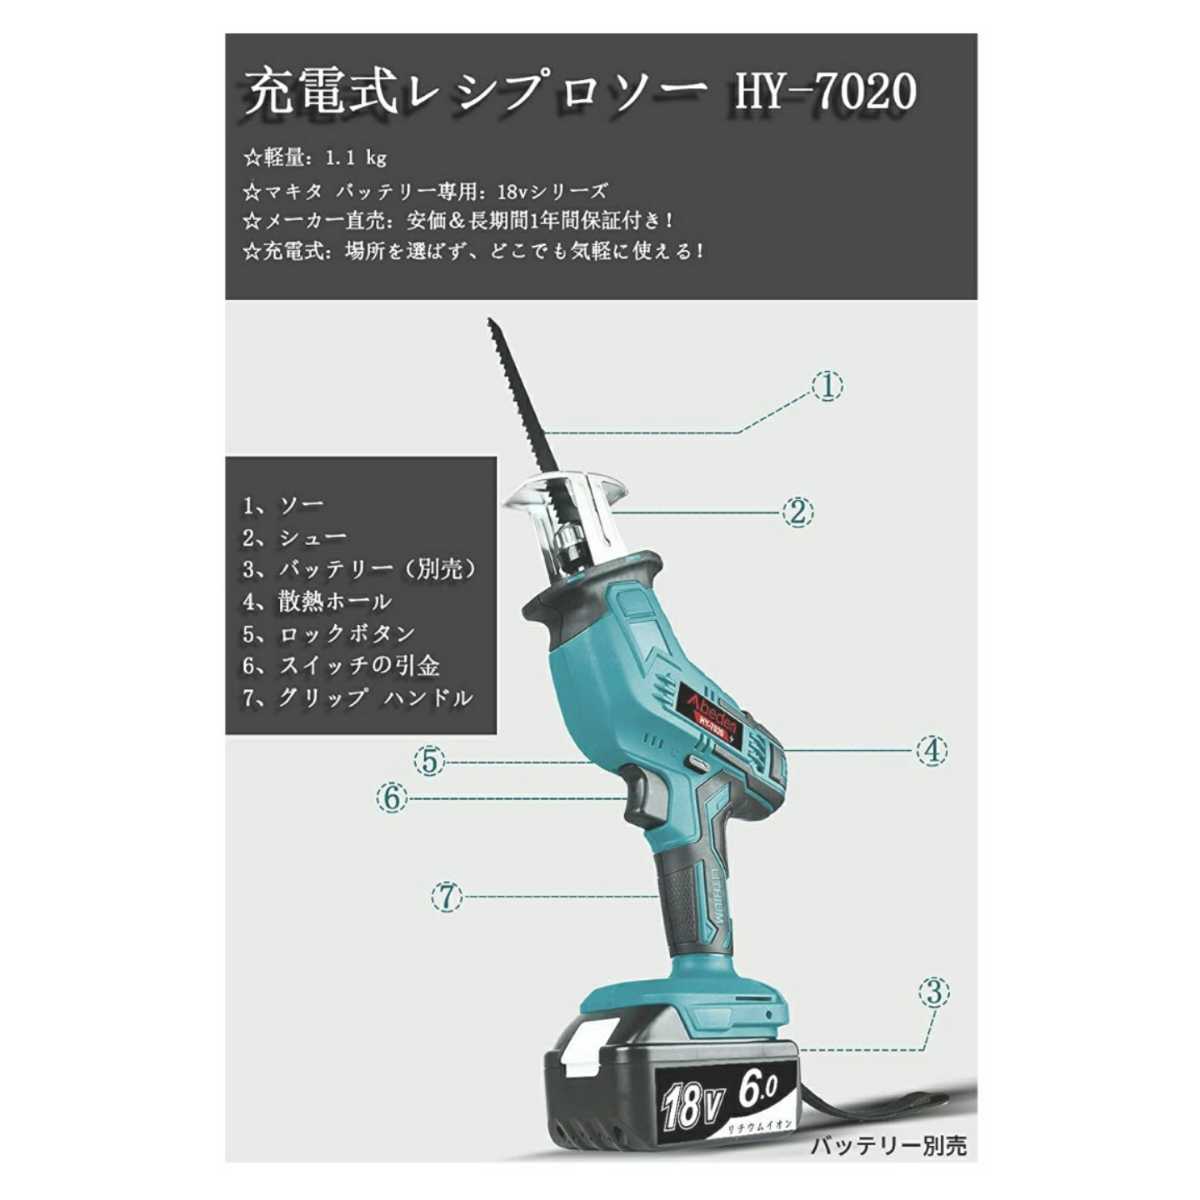  free shipping new goods cordless reciprocating engine so- blue Makita interchangeable BL1860 etc. correspondence body razor 2 ps attaching battery optional new system receipt possibility 